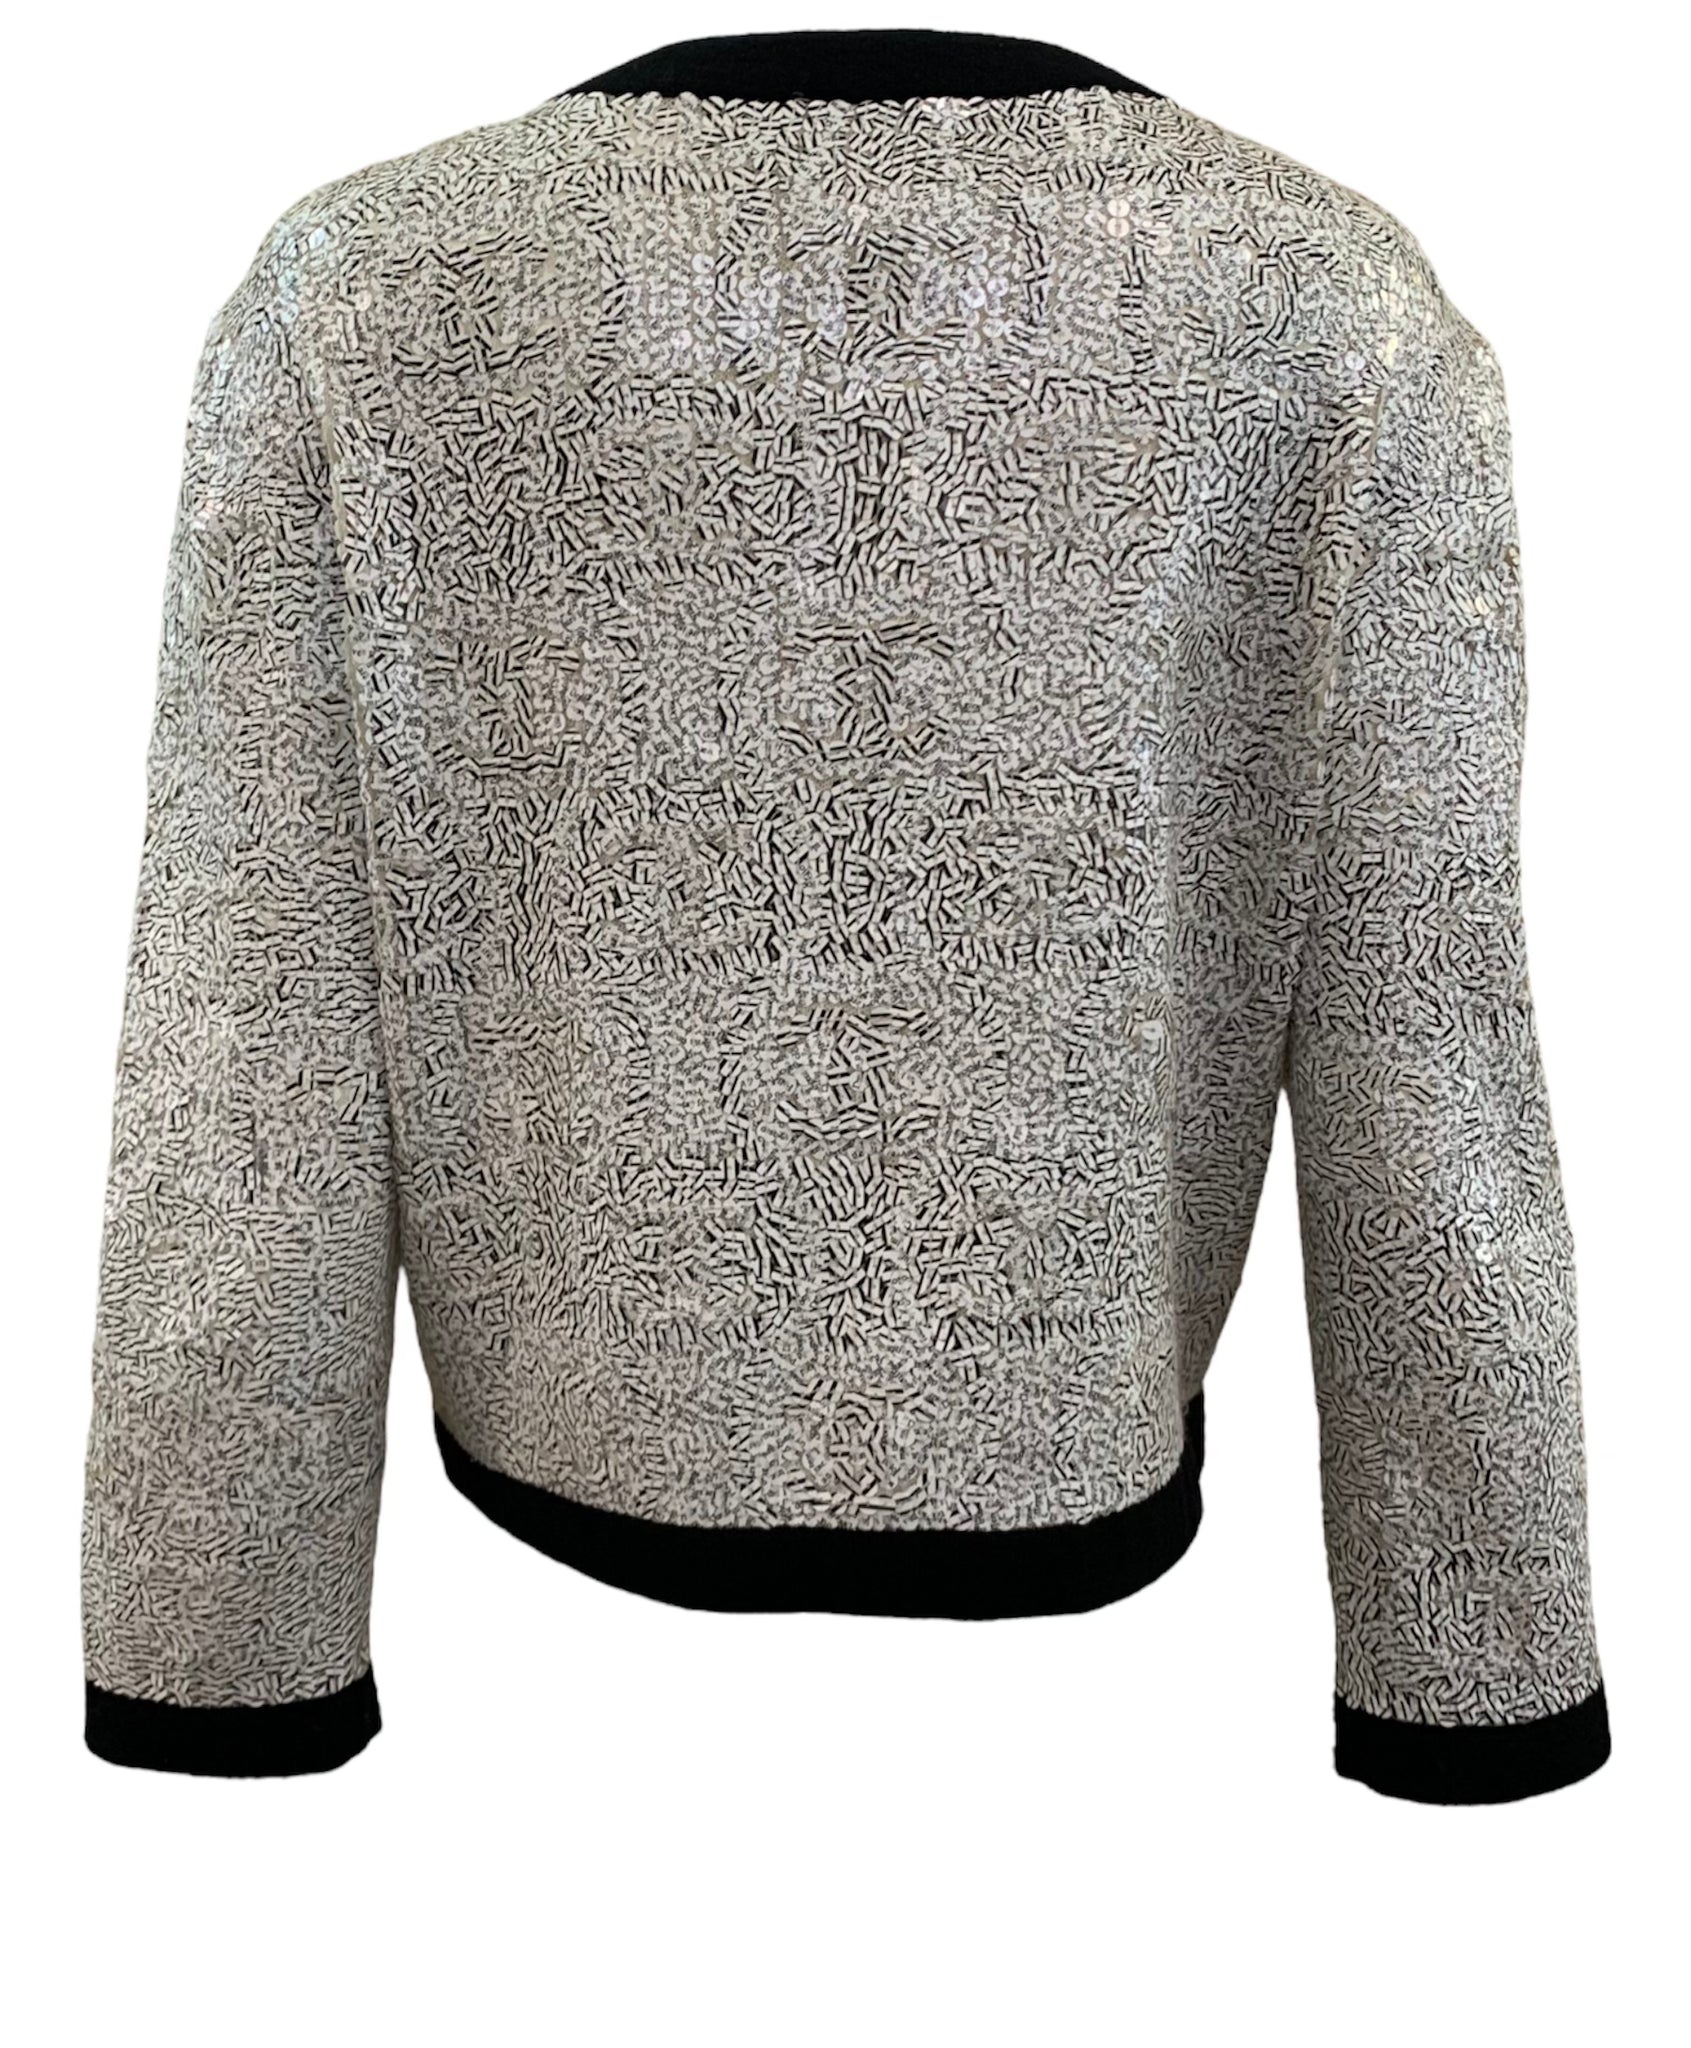 Chanel Contemporary Cashmere Wordy Sequin Cardigan BACK 3 of 5